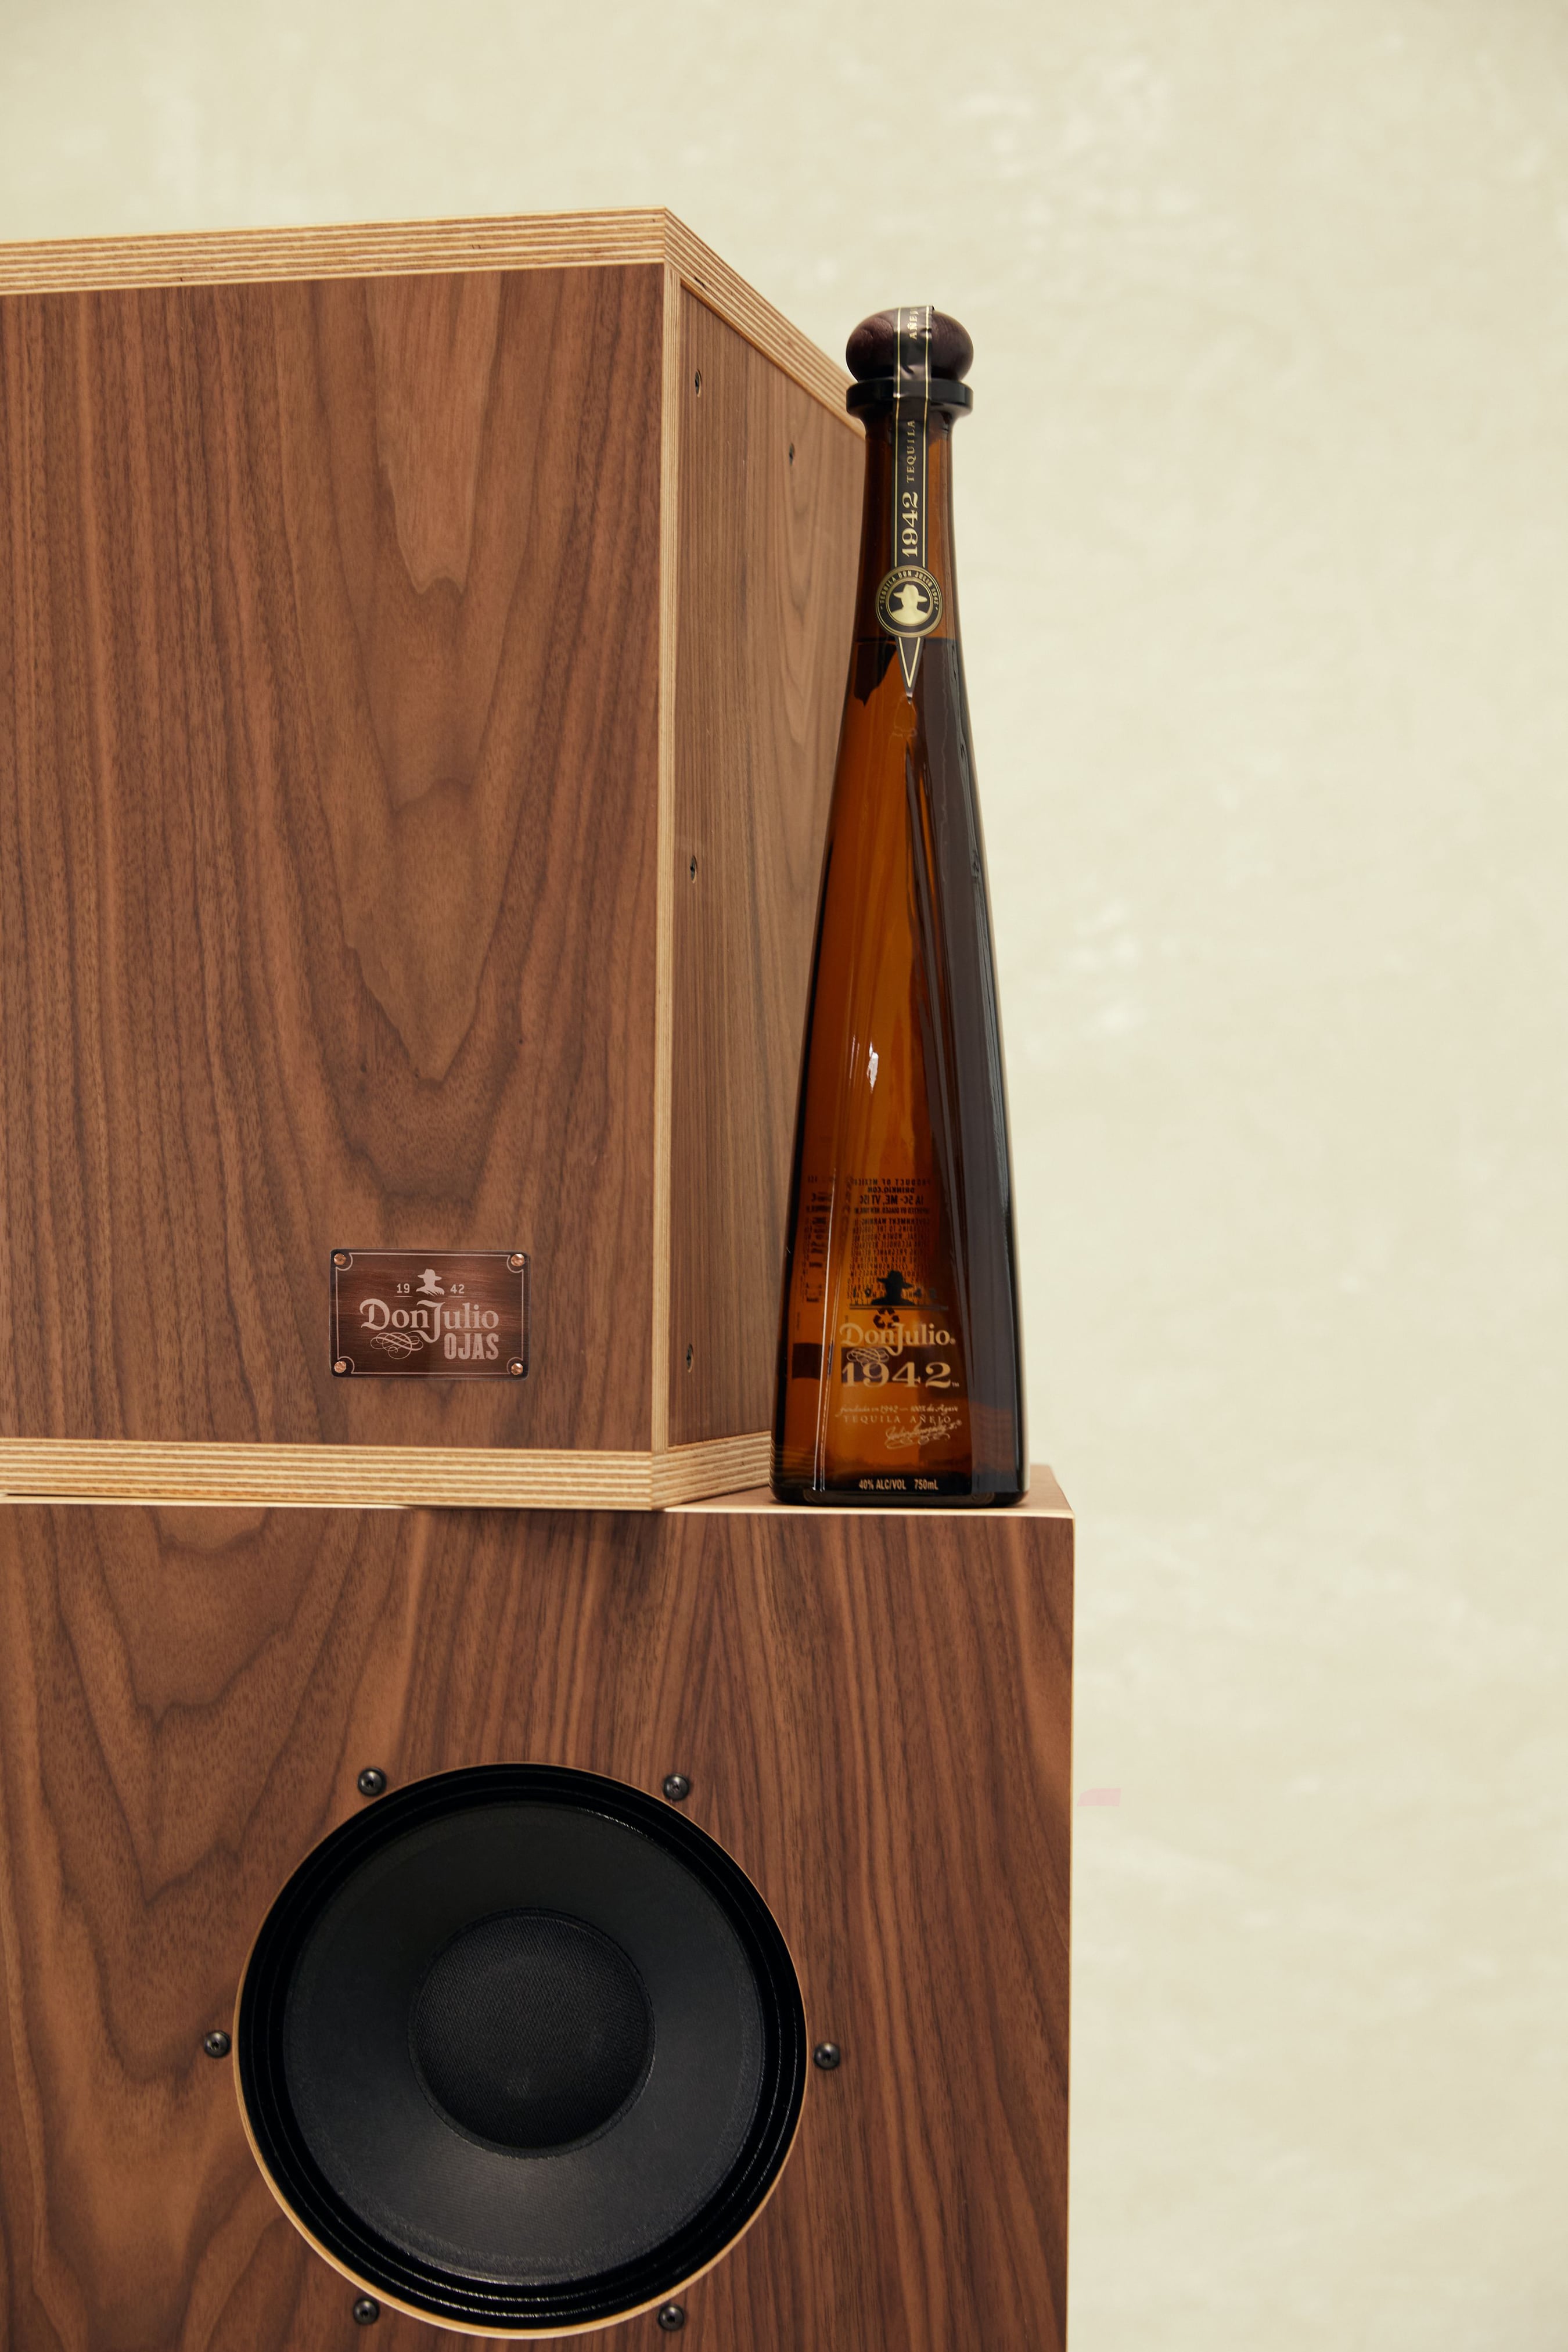 Tequila Don Julio 1942 x OJAS Artbook Shelf Speakers, inspired by the aesthetics of the iconic tall bottle.